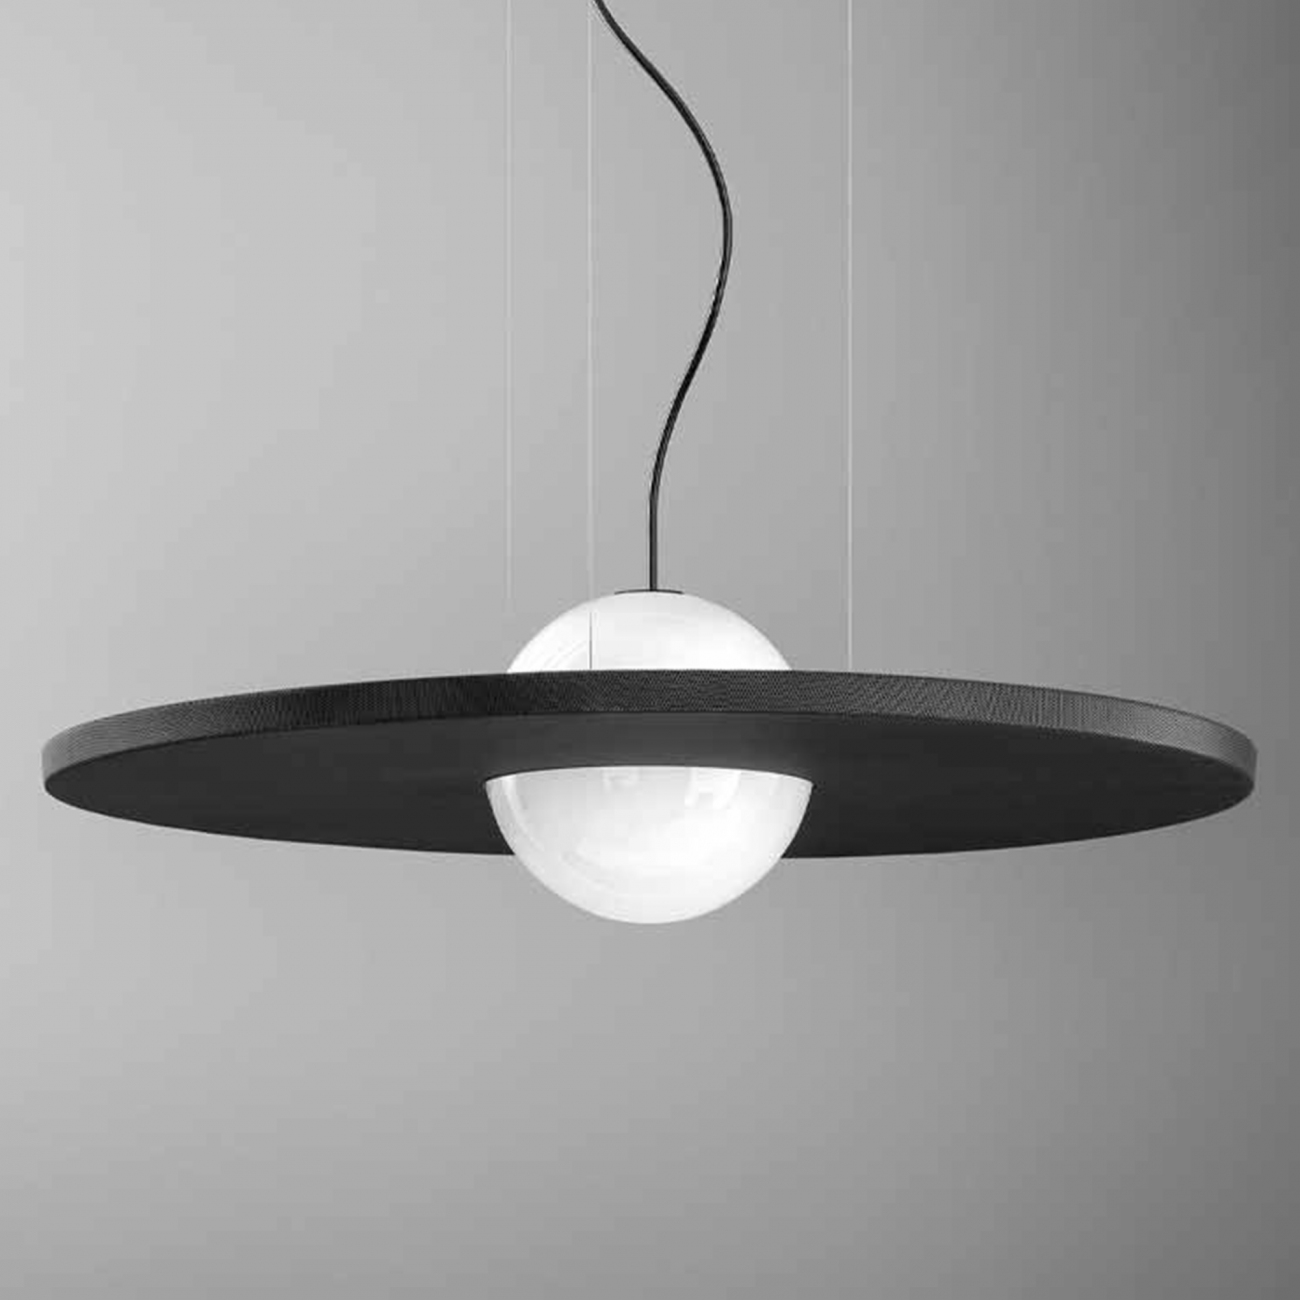 Olev Irving Silence Suspension Lamp